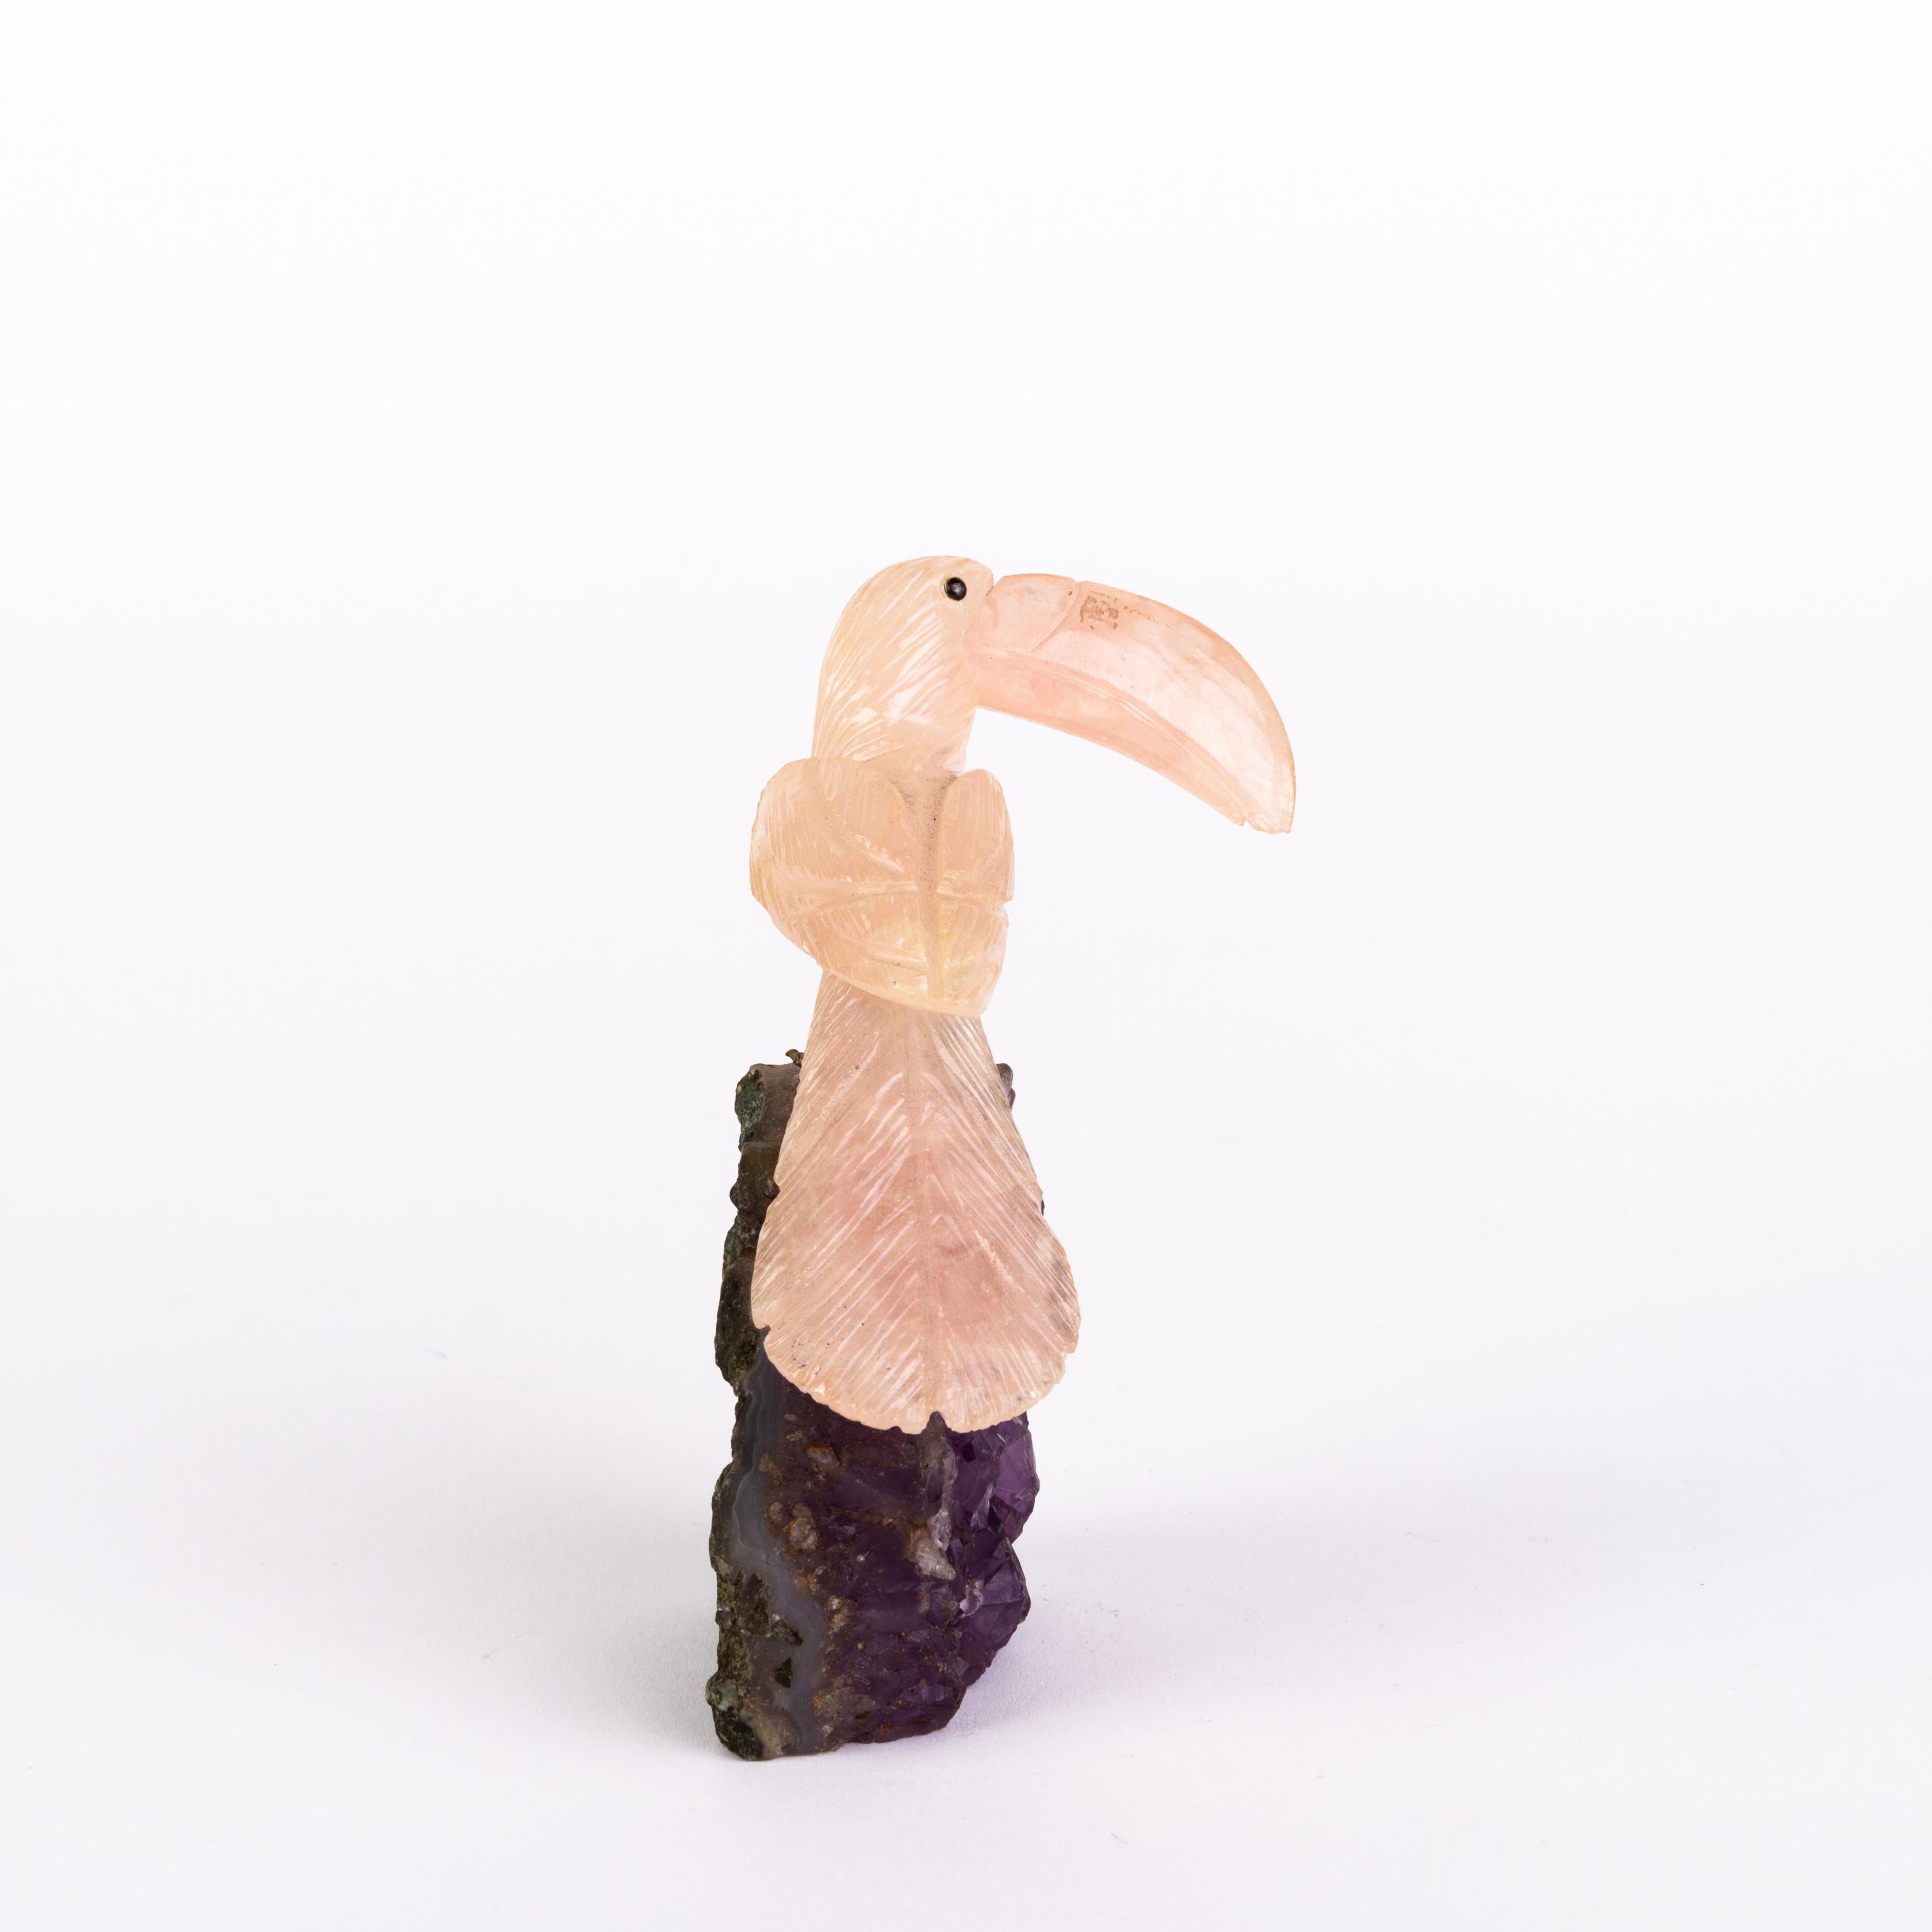 Carved Rose Quartz Gemstone & Amethyst Geode Exotic Pelican Bird Sculpture 
Good condition 
From a private collection.
Free international shipping.